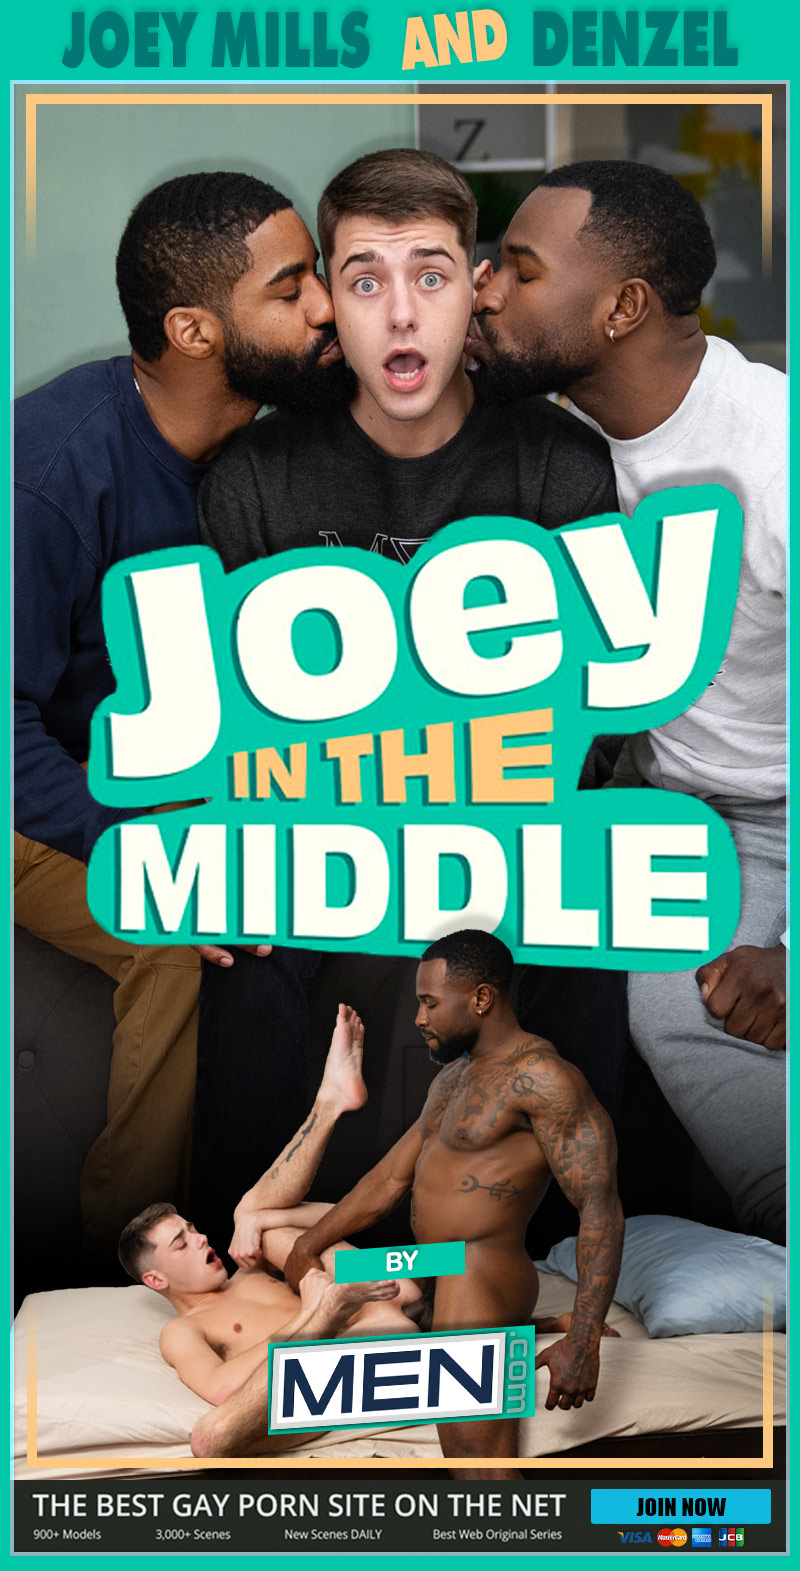 Joey In The Middle, Part 1 (Denzel Tops Joey Mills) at MEN.com